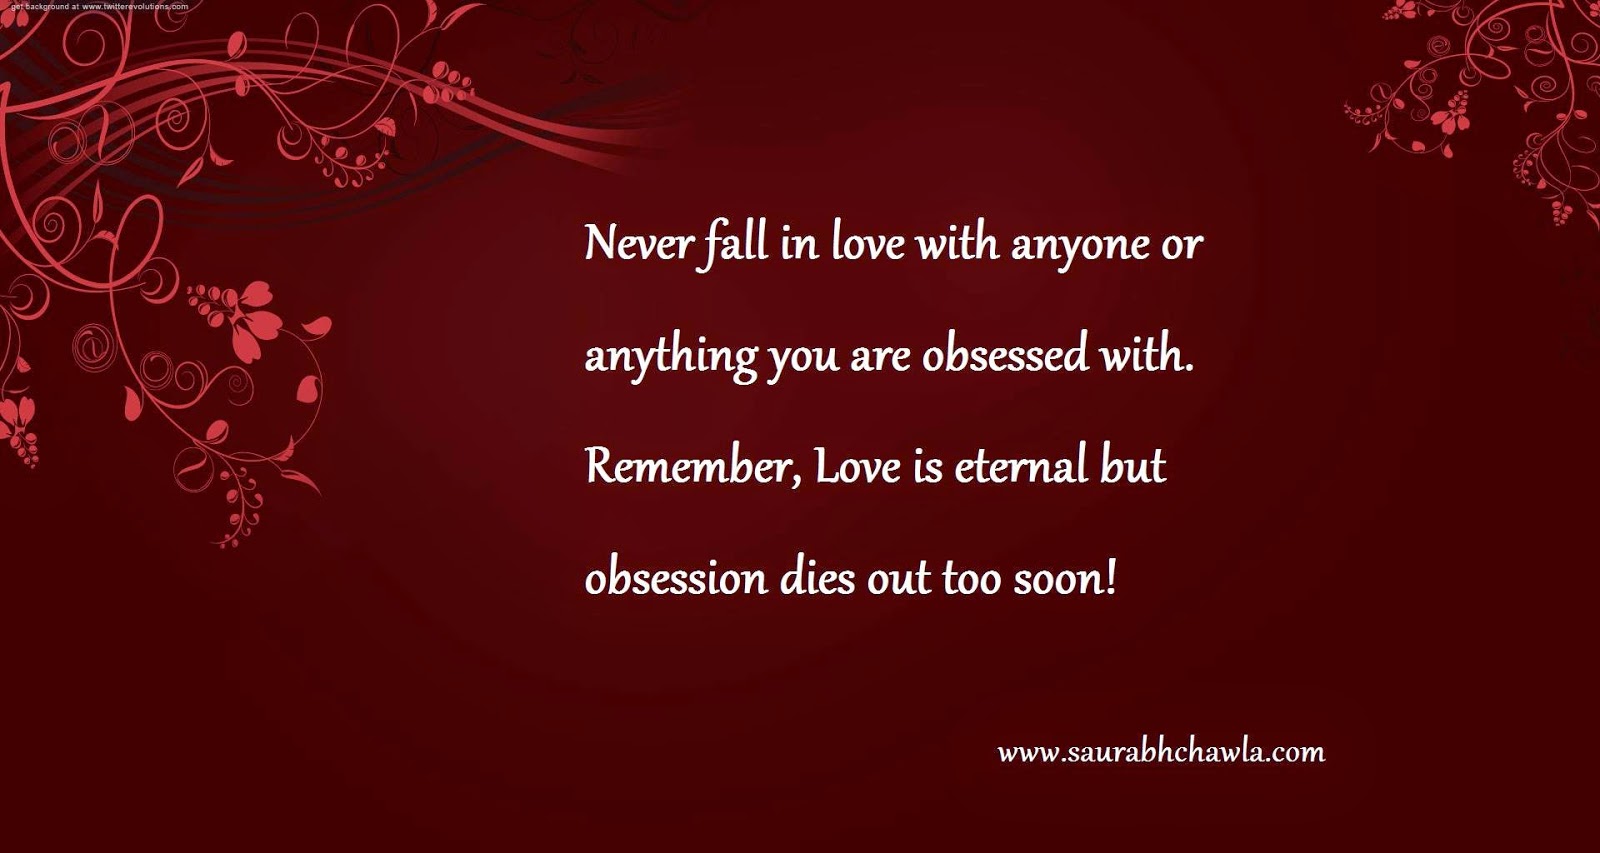 Never Fall in love with anyone or anything you are obsessed with. Remember, Love is eternal but obsession dies out too soon